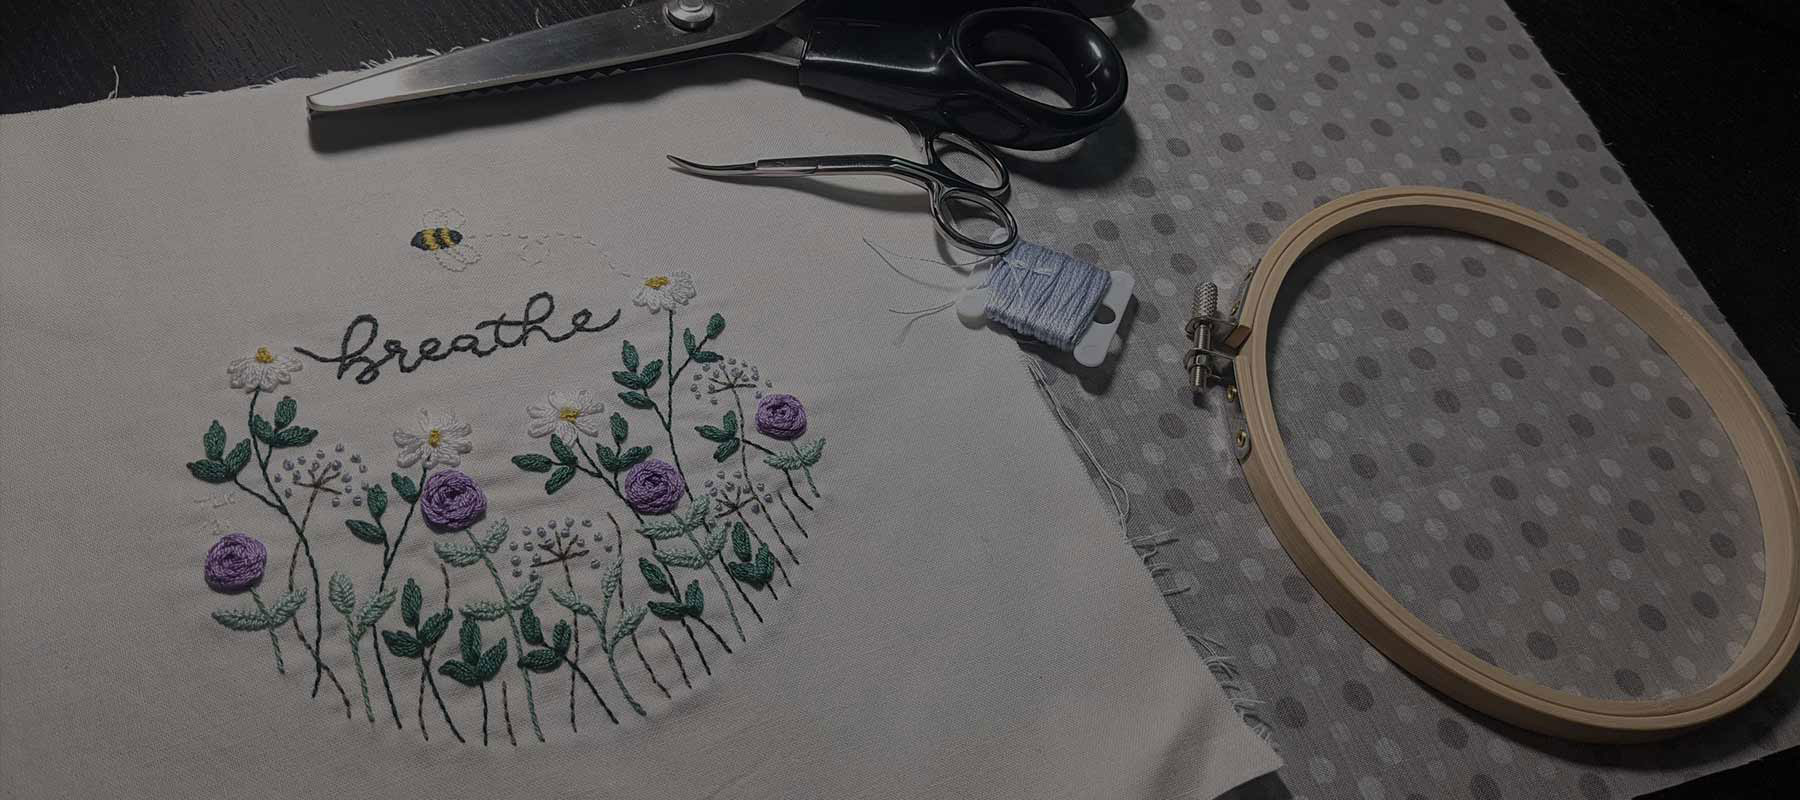 My First FREE Stitch-along 'Just Breathe' Was Great!